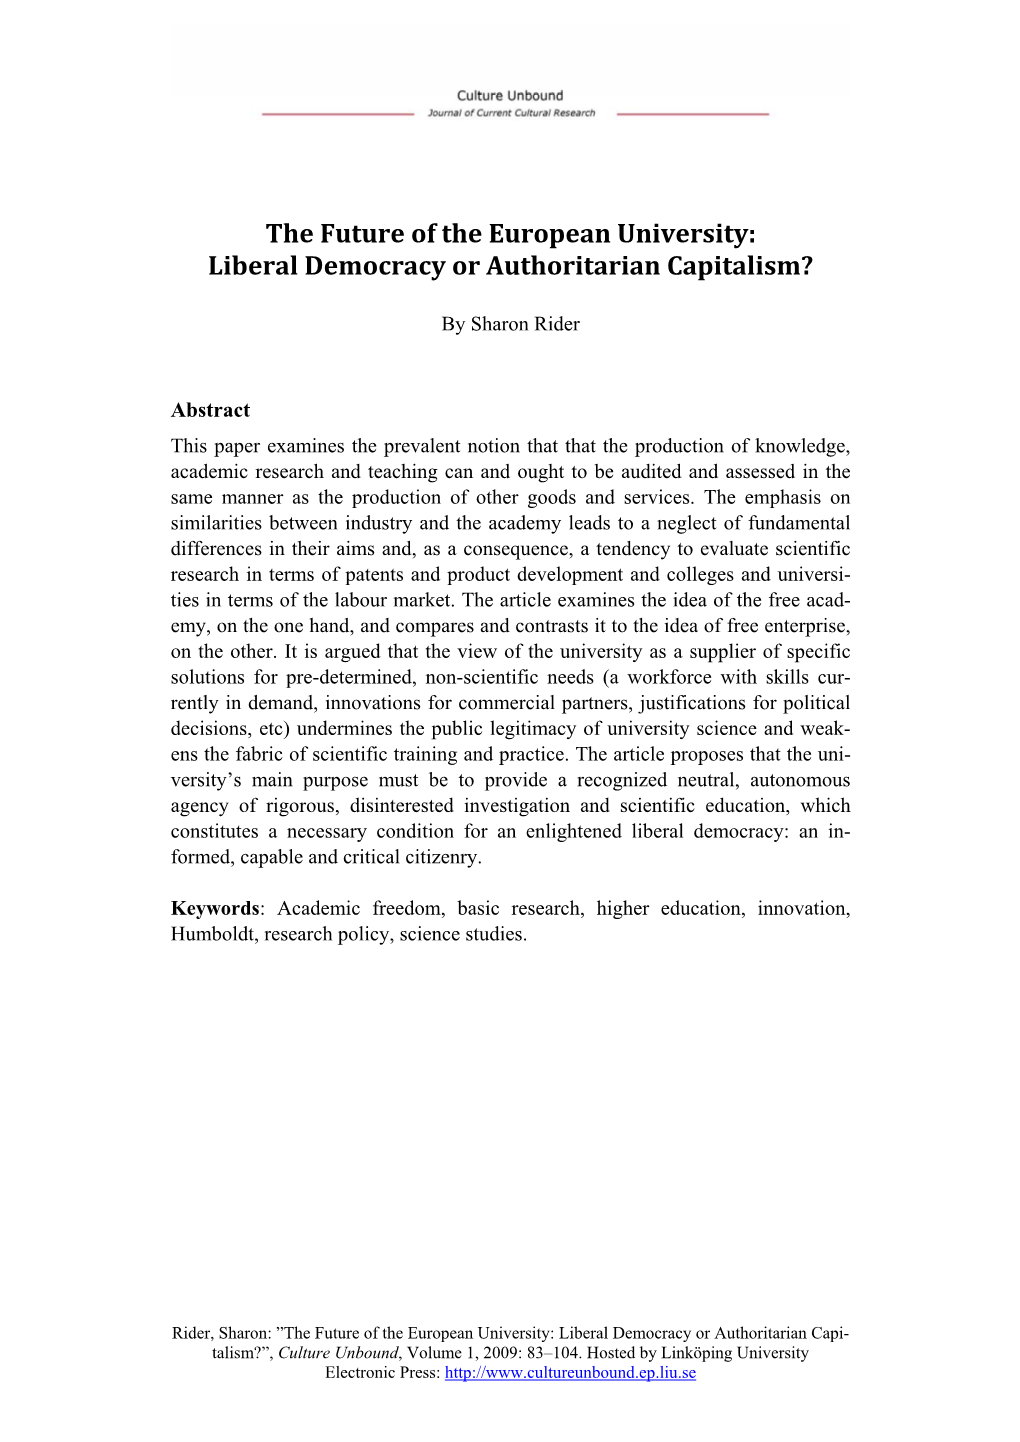 Liberal Democracy Or Authoritarian Capitalism?